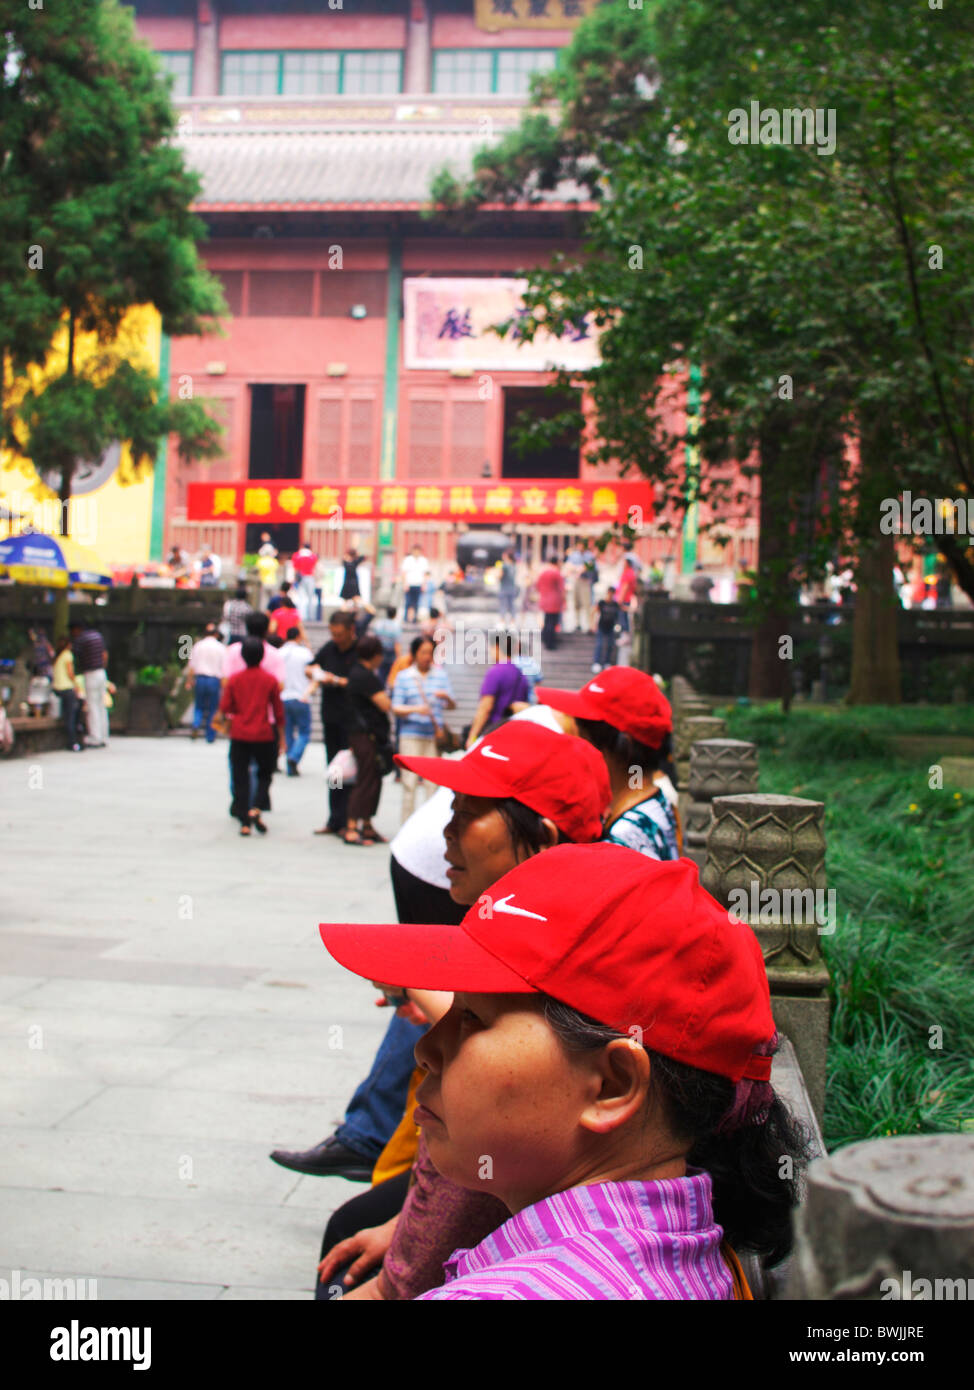 Chinese tourists wearing red hats wait on benches outside a temple in Hangzhou in the National Park Stock Photo